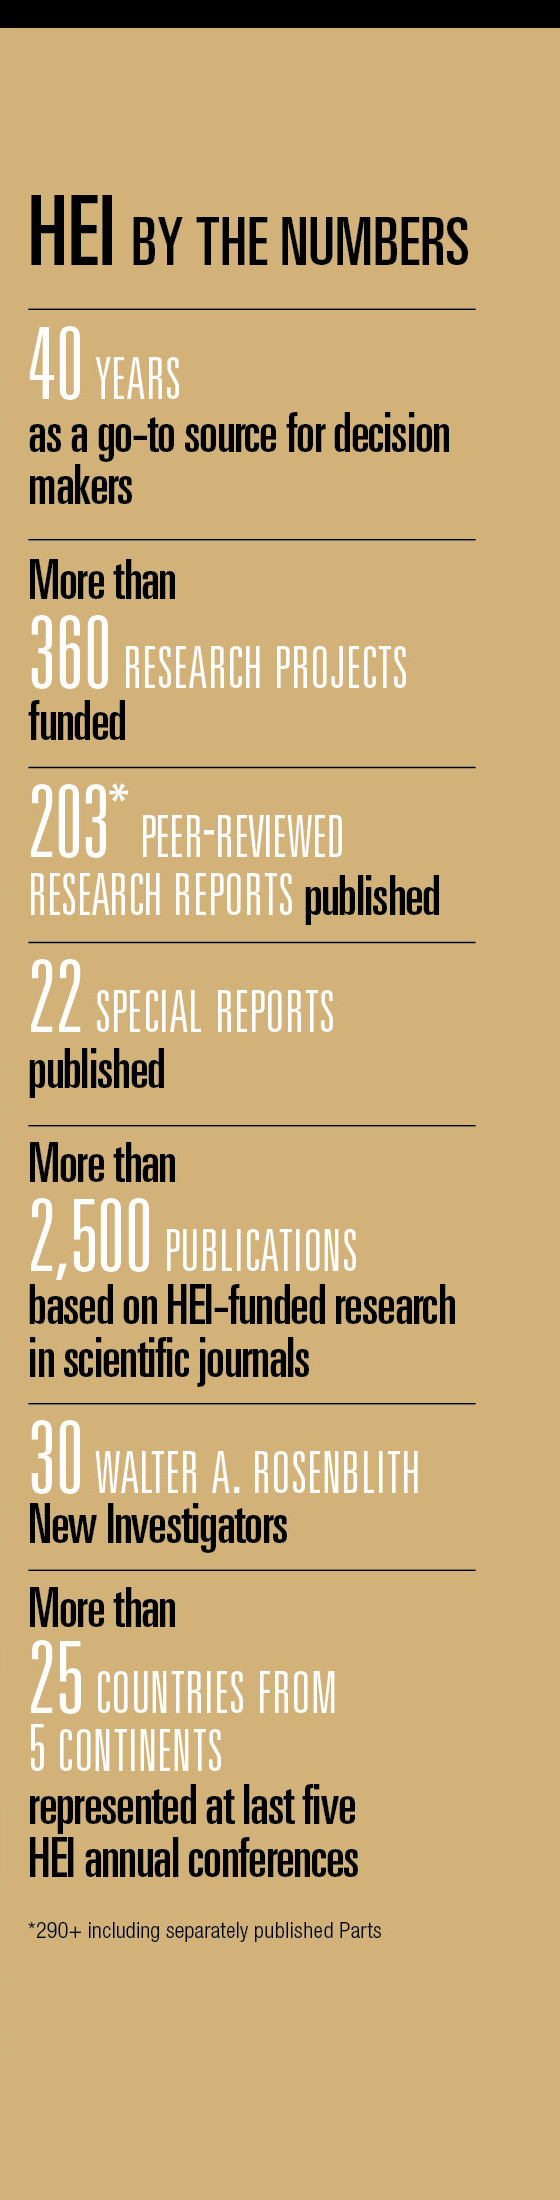 Simple graphic showing numbers of HEI reports published and other achievements over past 40 years.